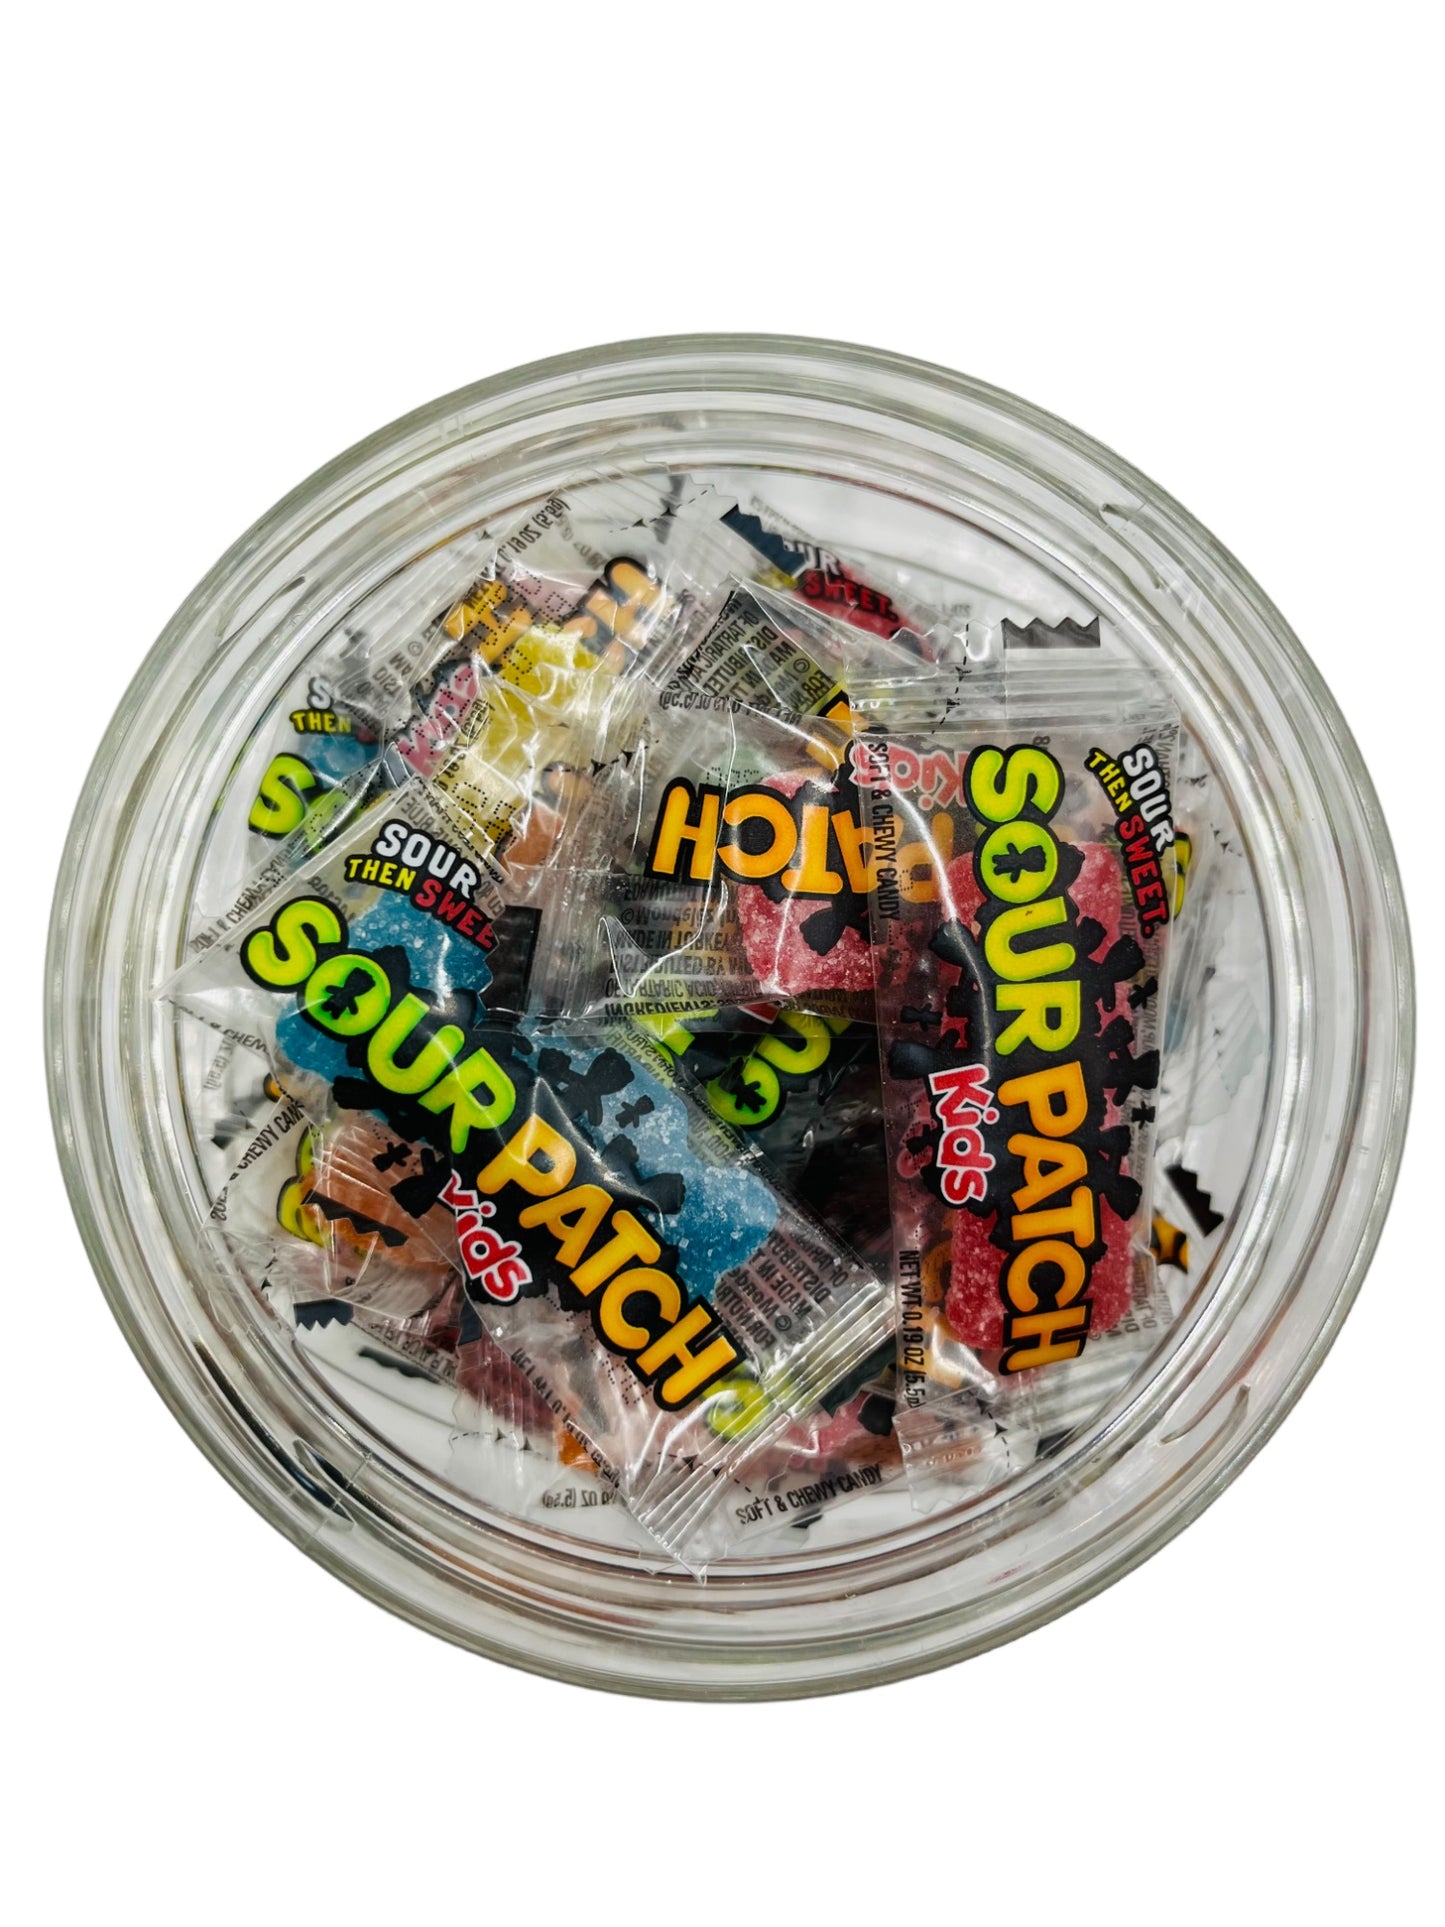 Simway Sweets Jar 520g - Individually Wrapped Sour Patch Kids Sweets - Approximately 75 Pieces